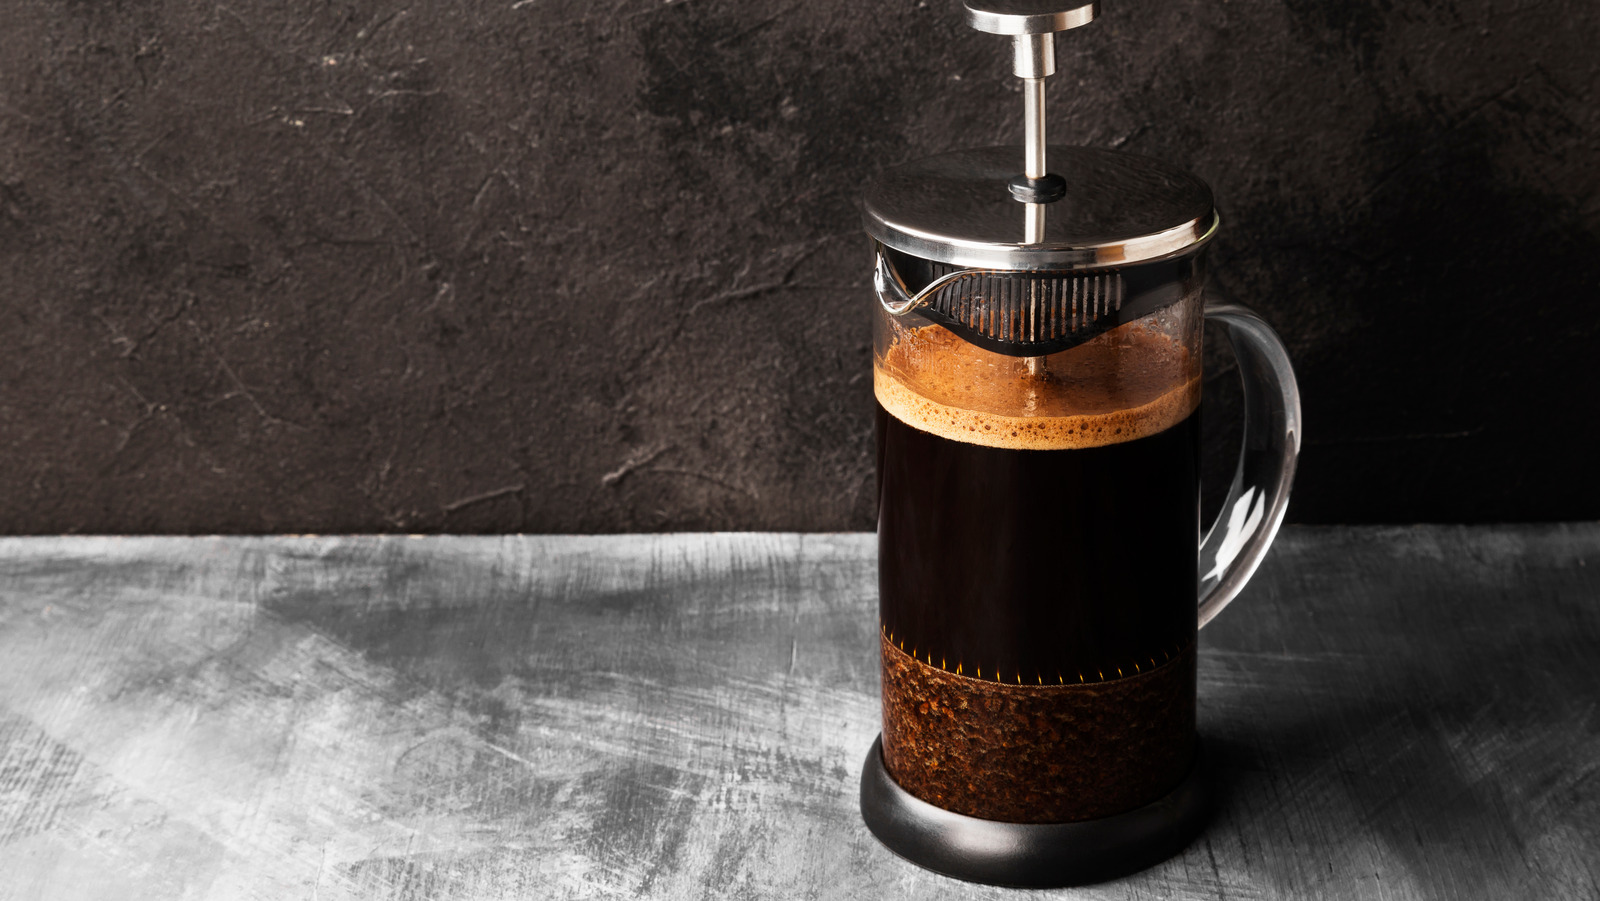 https://www.tastingtable.com/img/gallery/the-french-press-hack-for-more-robust-coffee/l-intro-1703885831.jpg